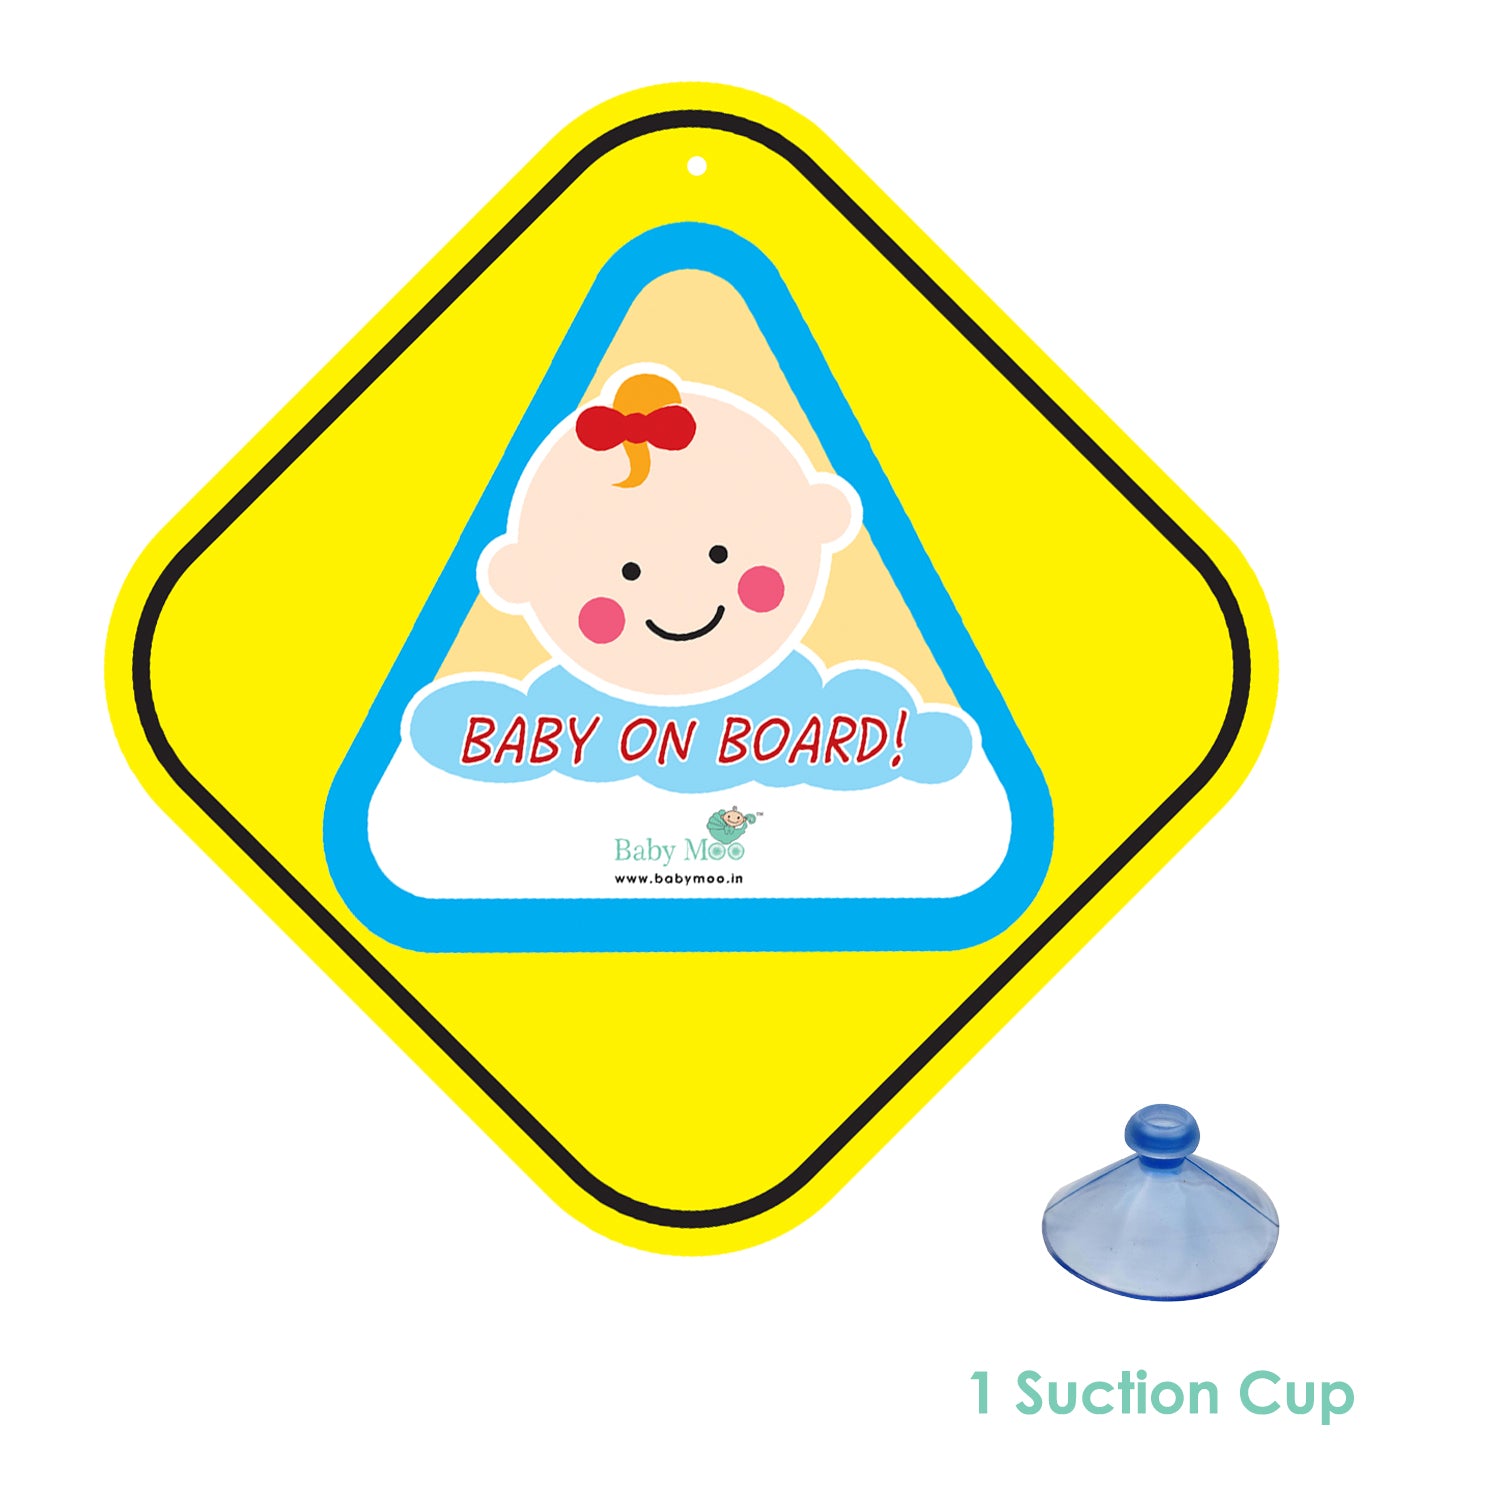 Baby Moo Triangular Baby On Board With Vacuum Suction Cup Clip - Blue